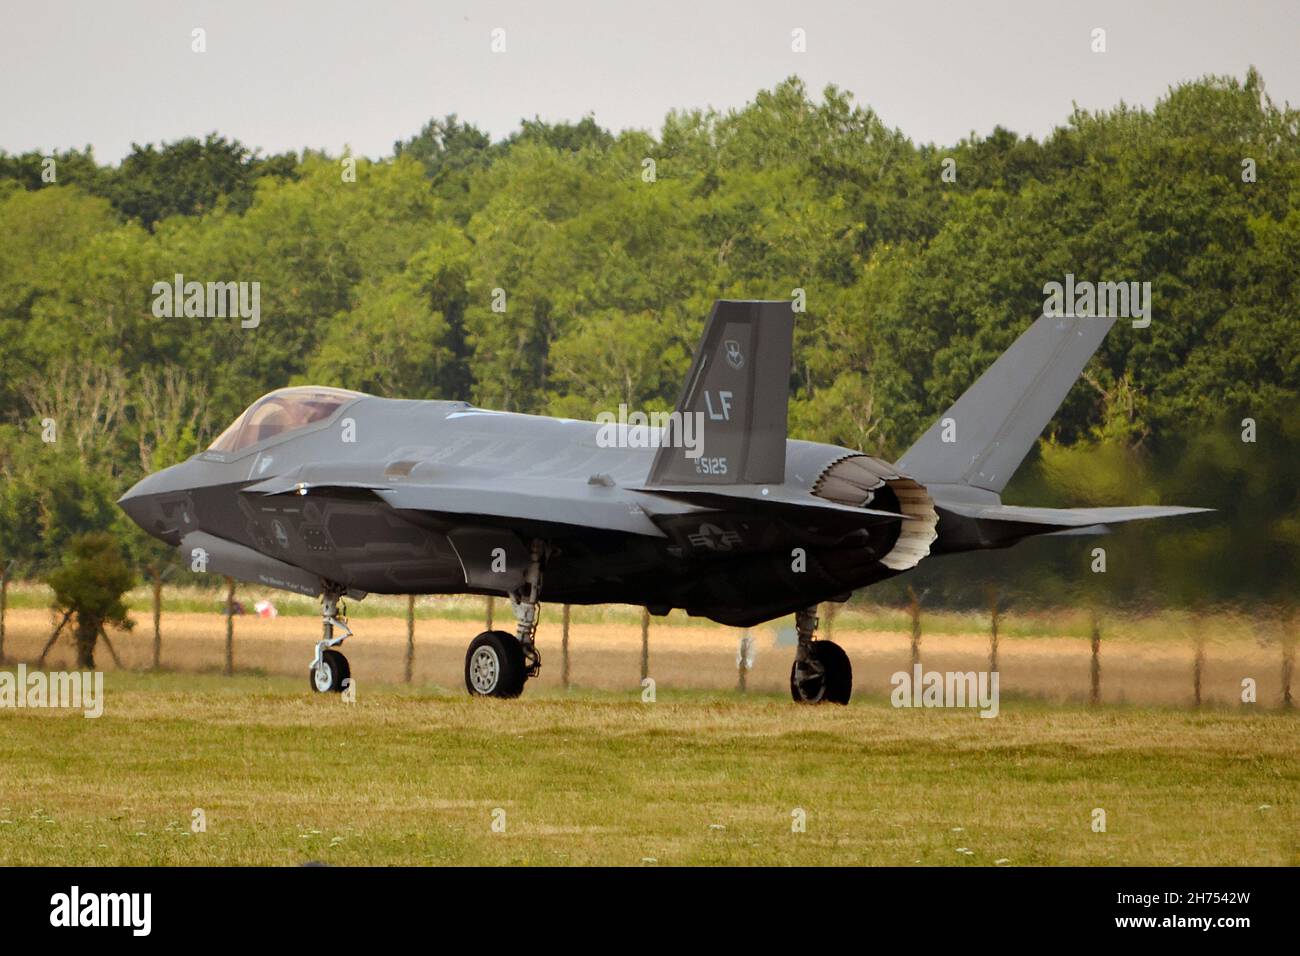 F-35 Lightning 2, 5th Generation stealth fighter Stock Photo